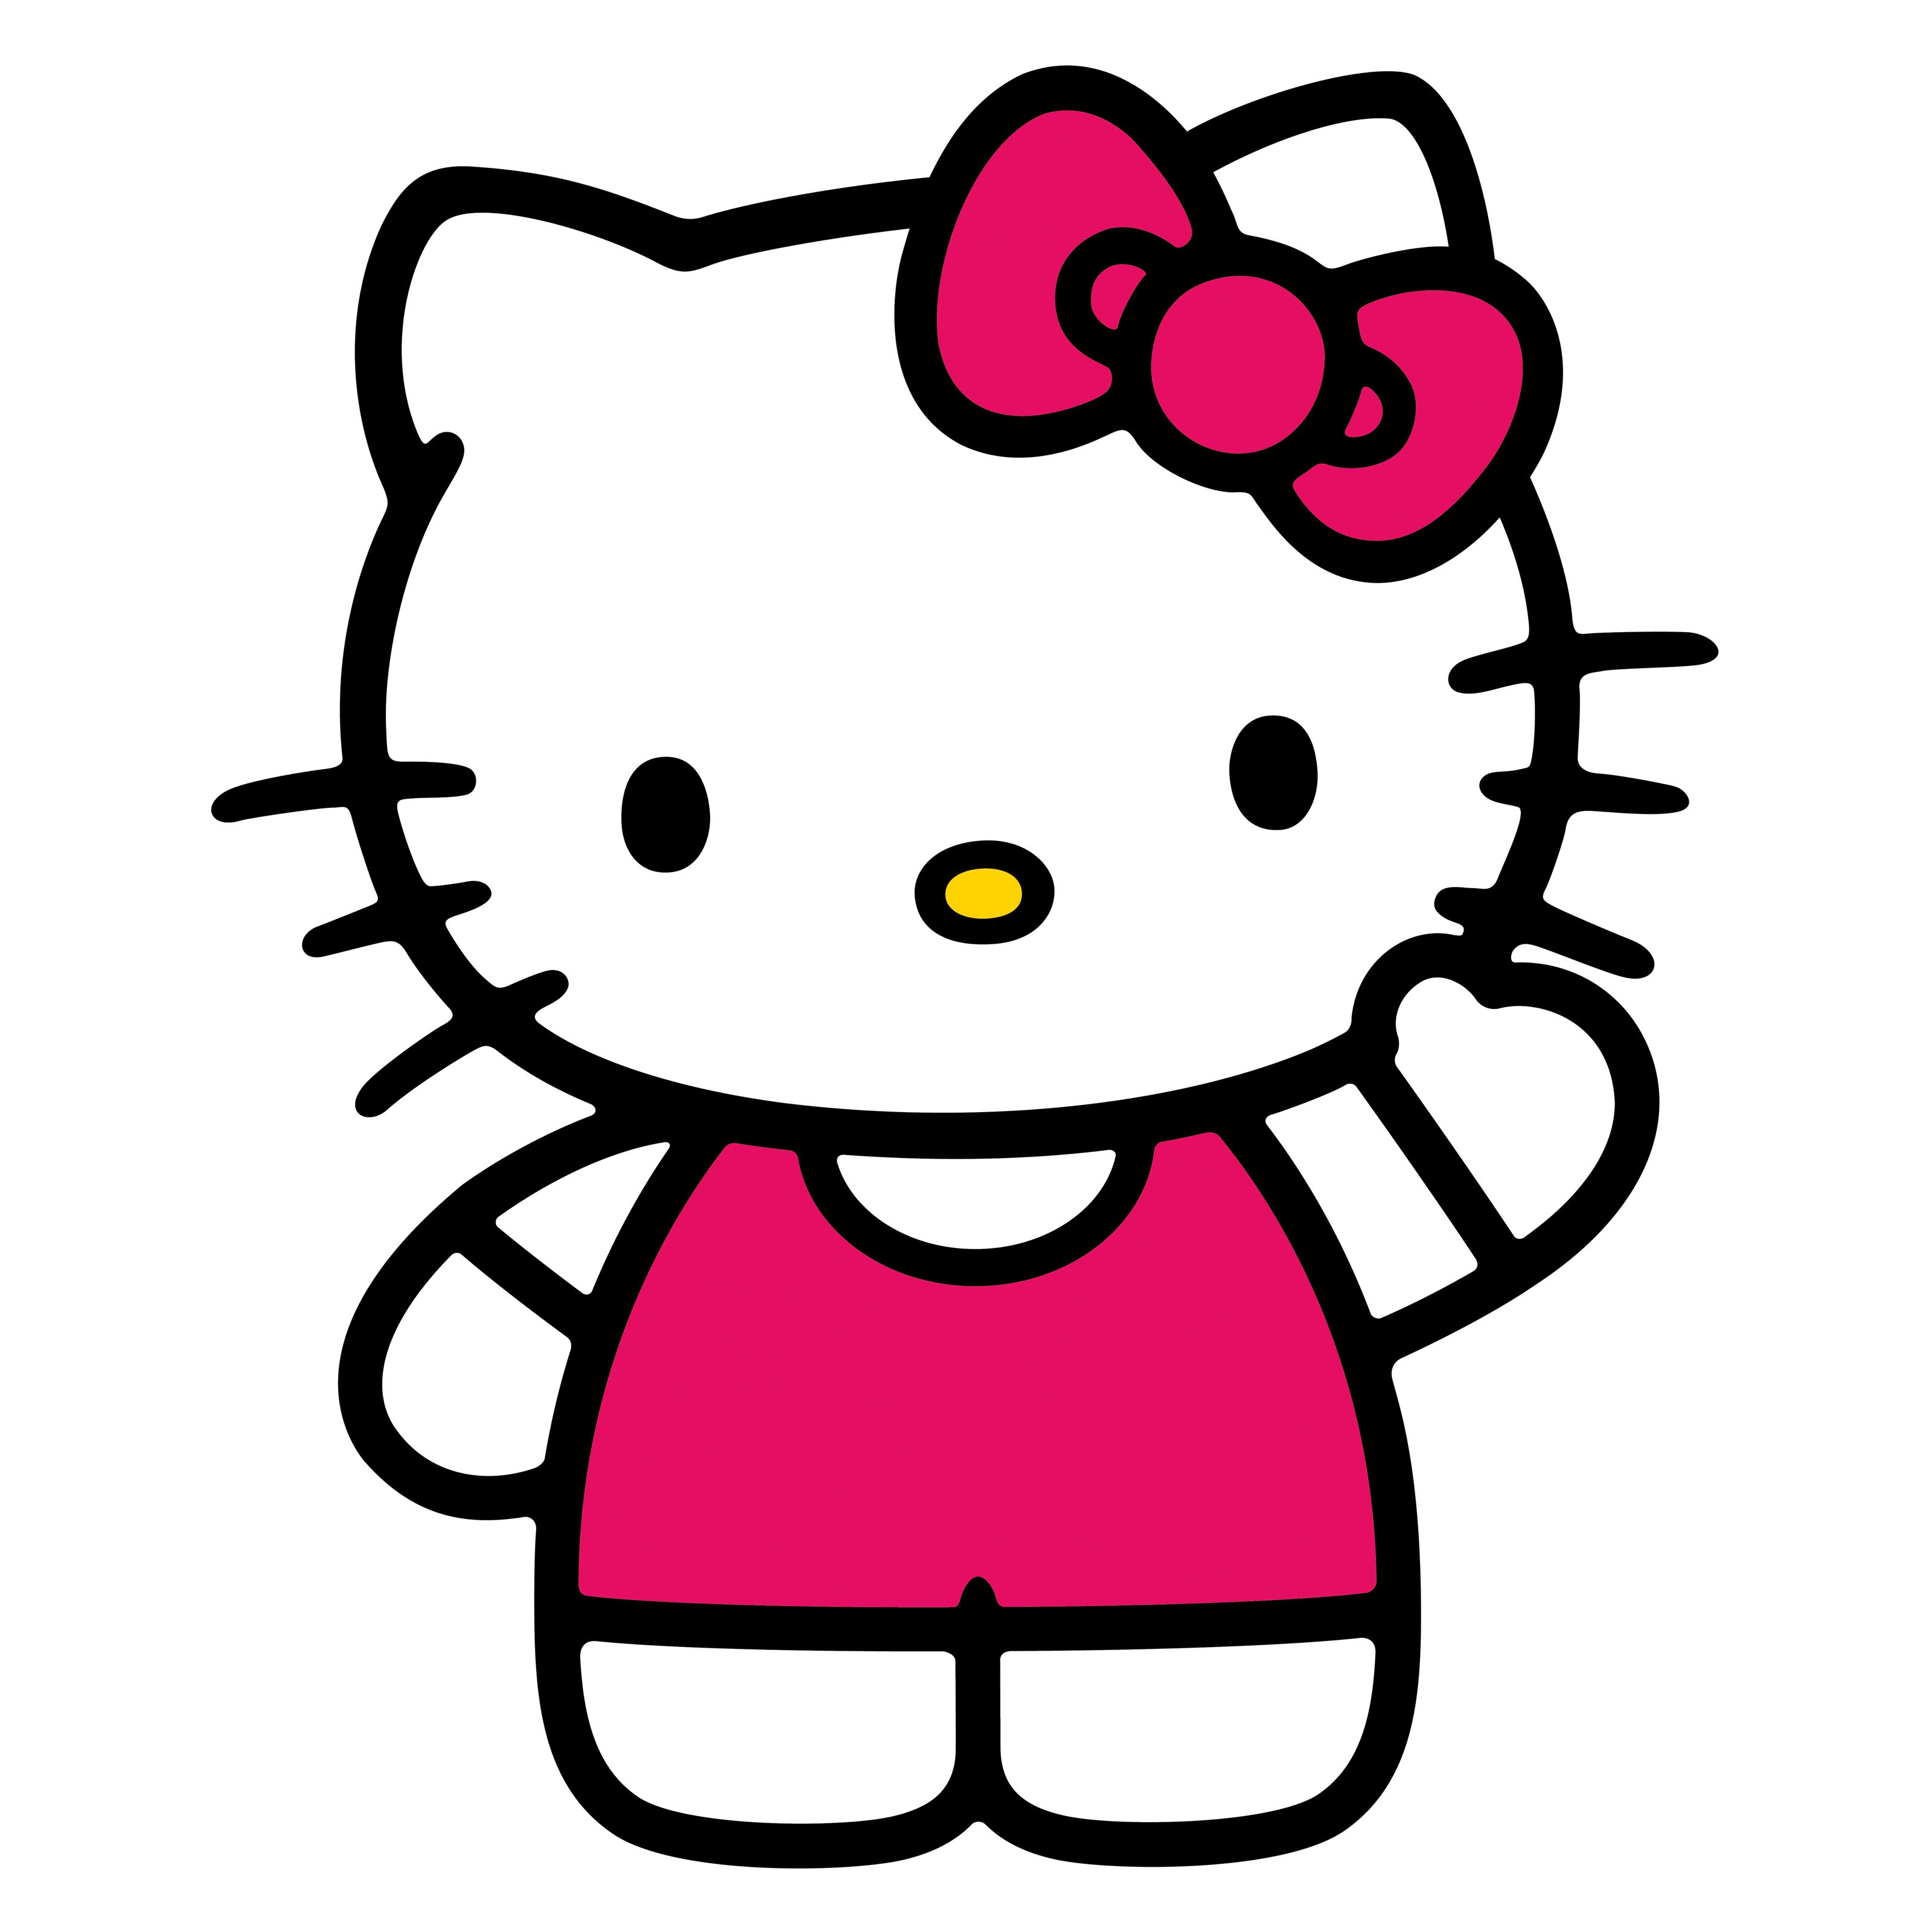 Cute Hello Kitty Pink Wallpaper wallpapers55com   Best Wallpapers